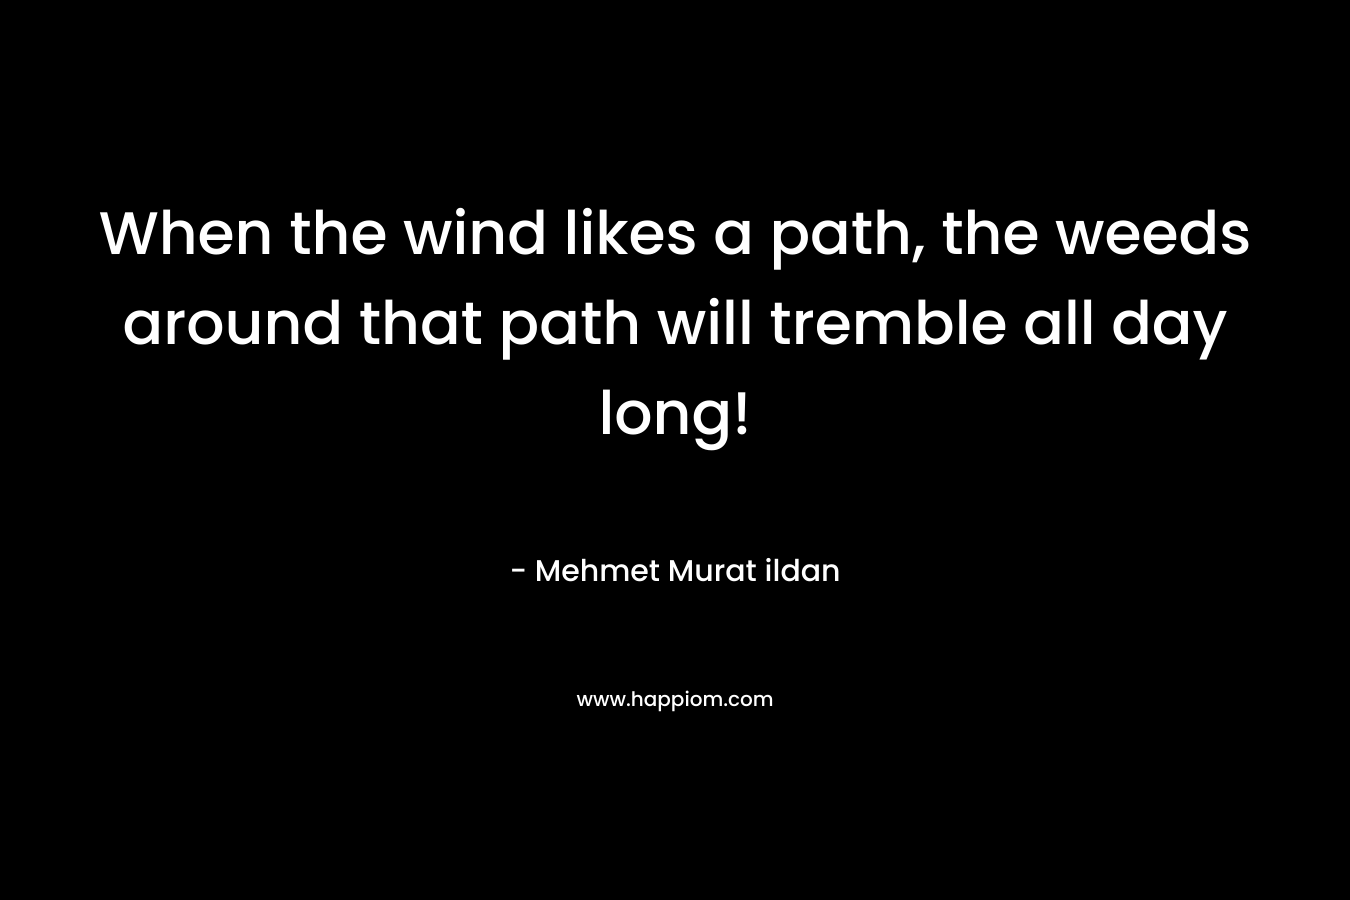 When the wind likes a path, the weeds around that path will tremble all day long! – Mehmet Murat ildan